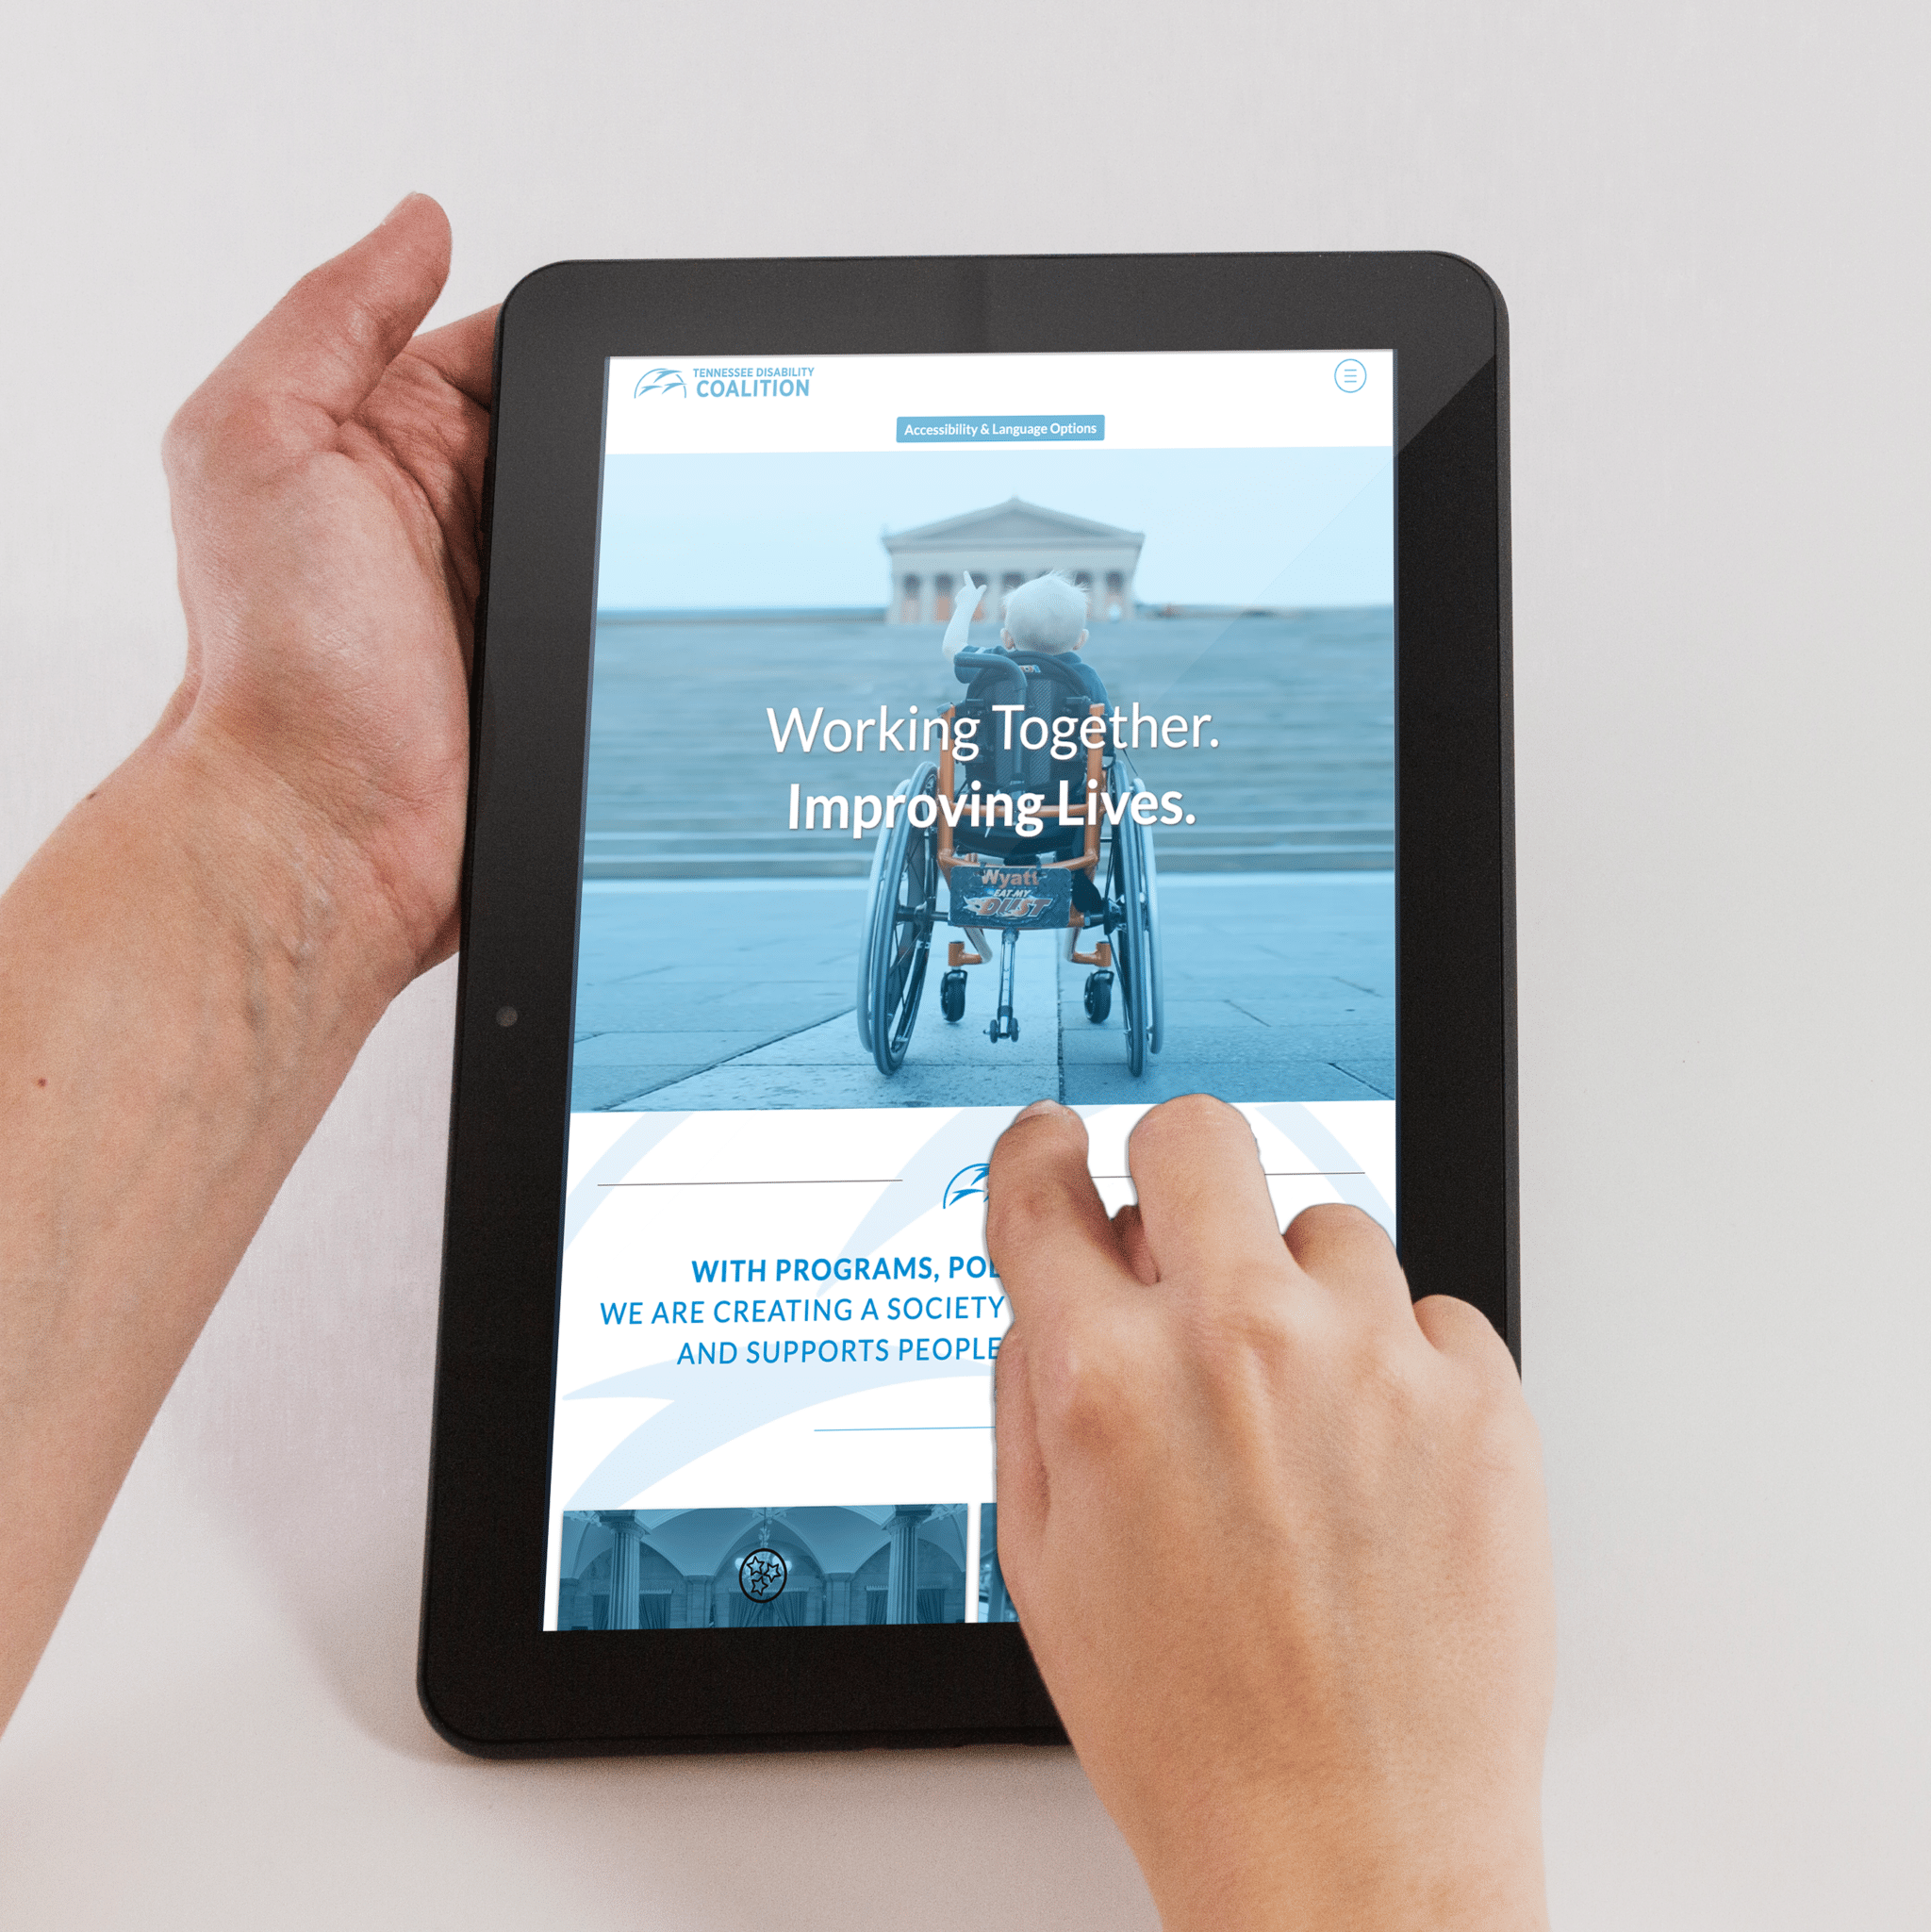 The Tennessee Disability Coalition website tablet view showing user accessibility.